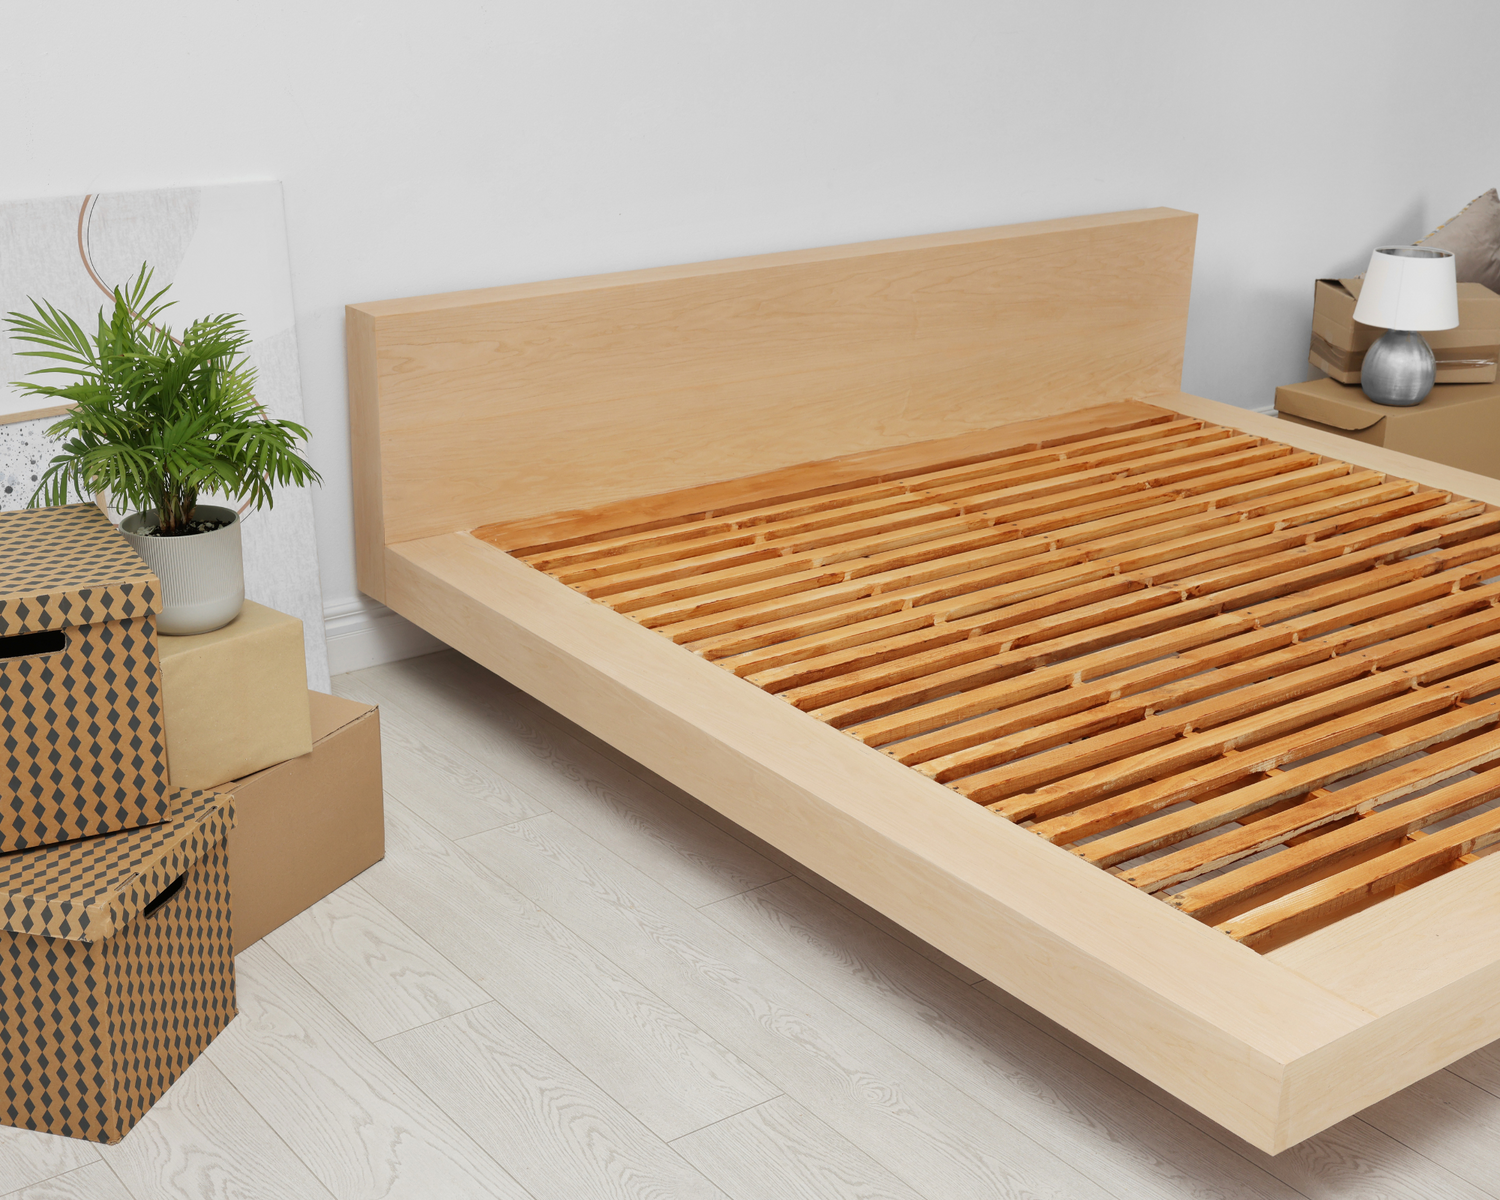 A bed frame showing its strong base support of solid wooden slats to support its mattress.